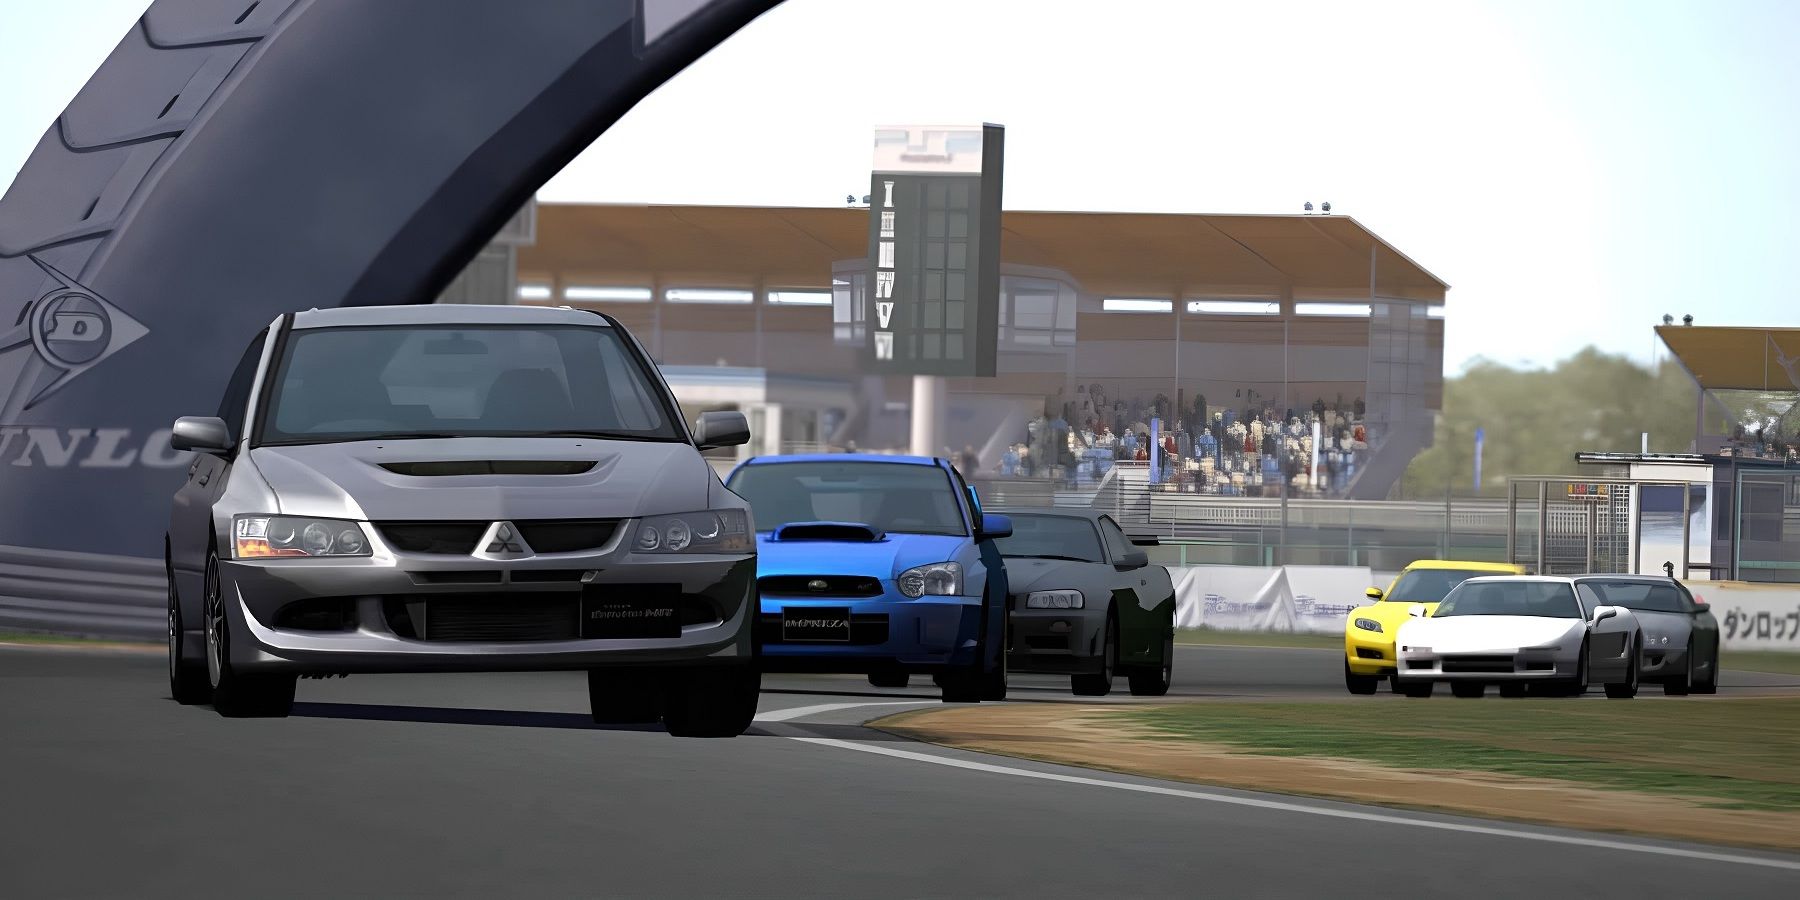 Gran Turismo 4 Cheat Codes Discovered Nearly 20 Years After Release